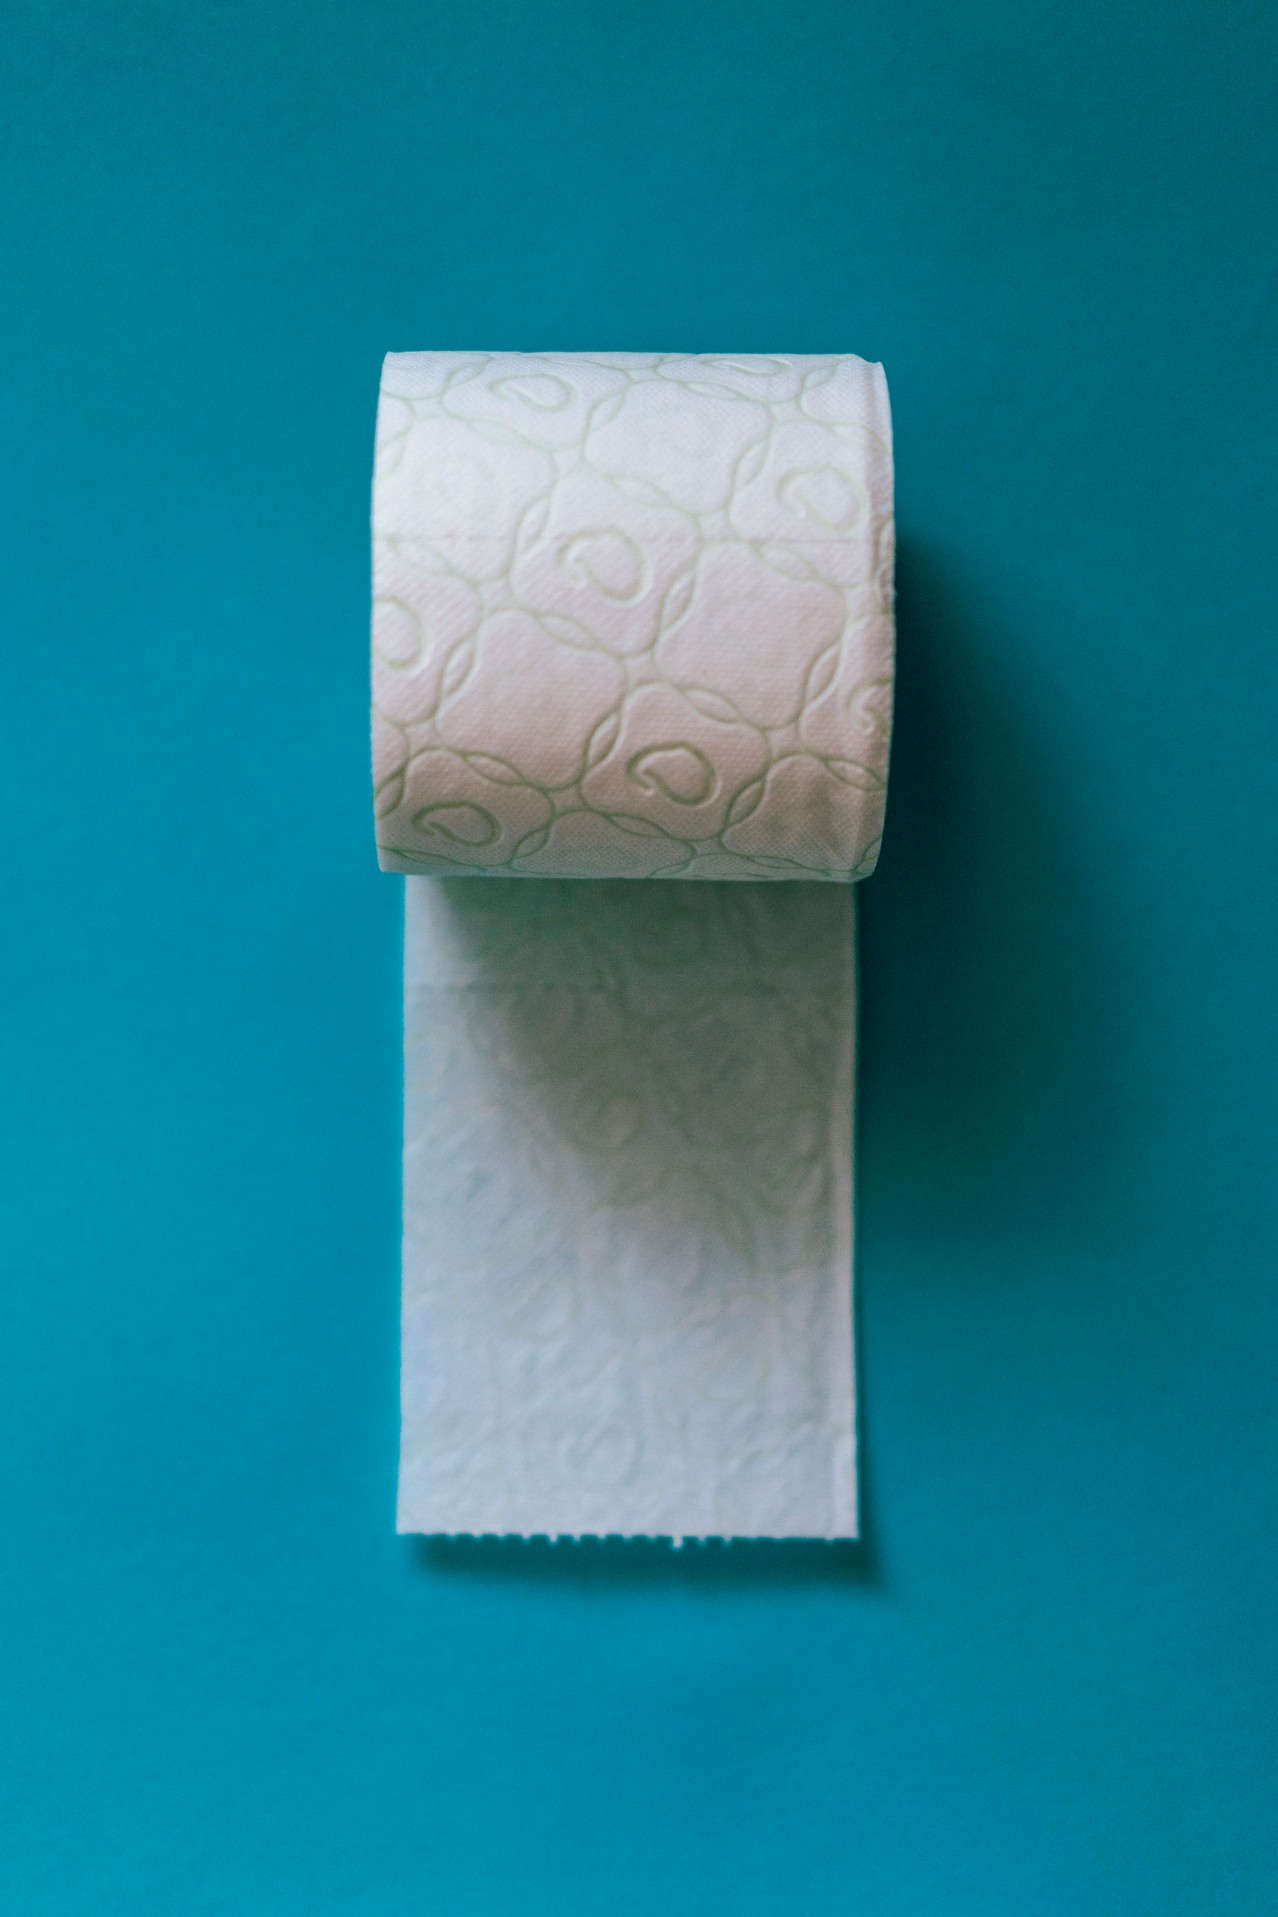 Toilet paper on the blue background